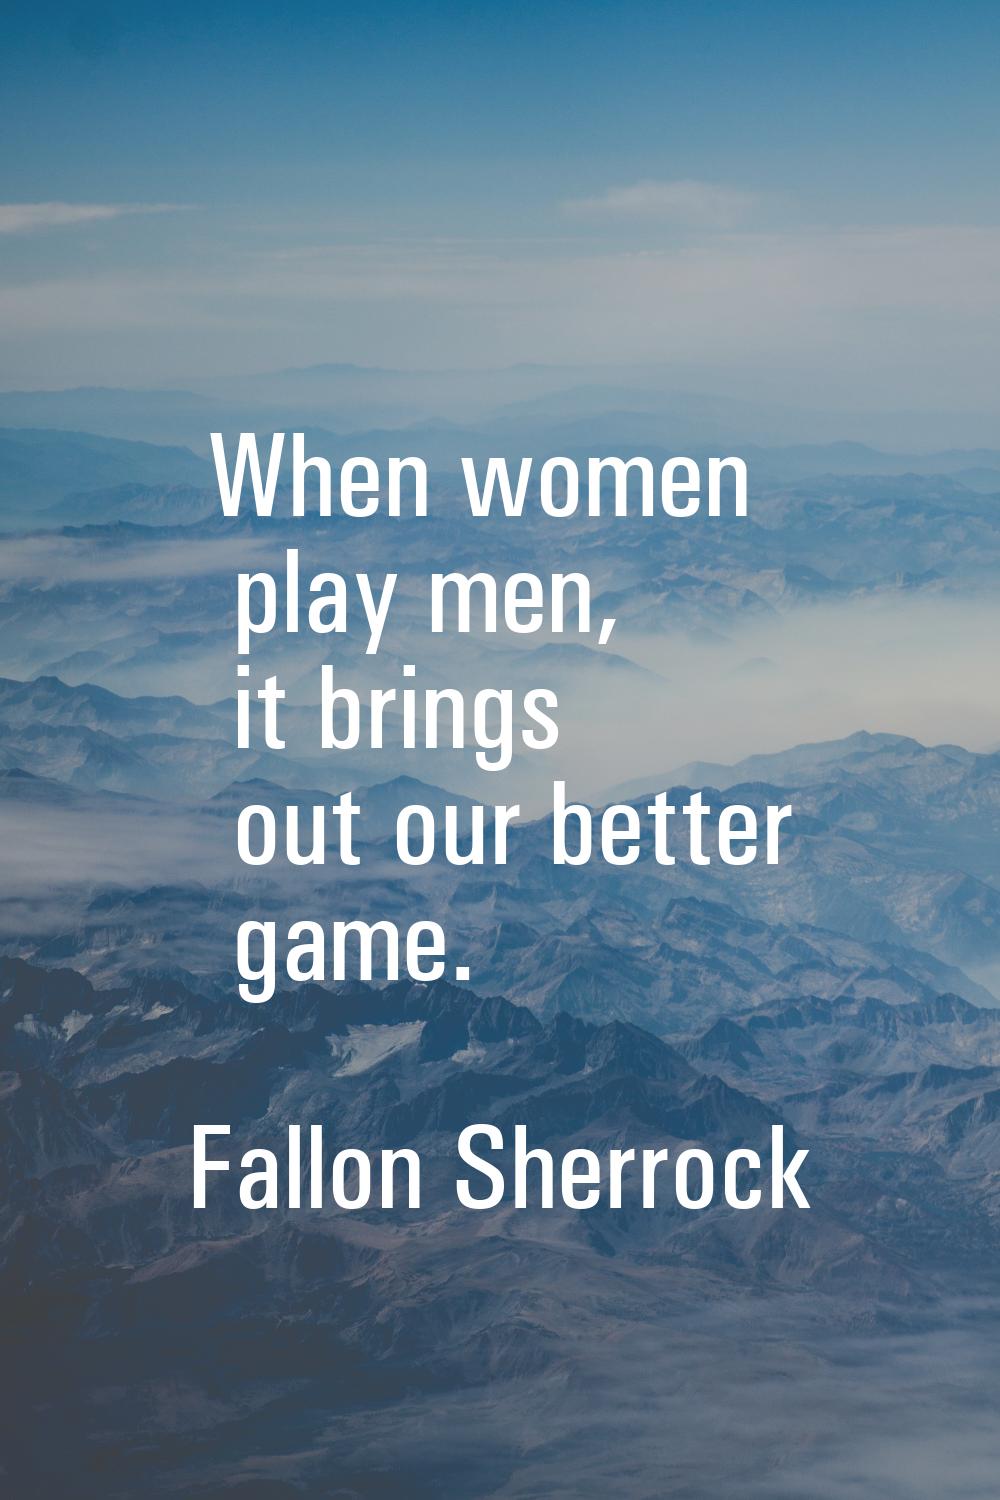 When women play men, it brings out our better game.